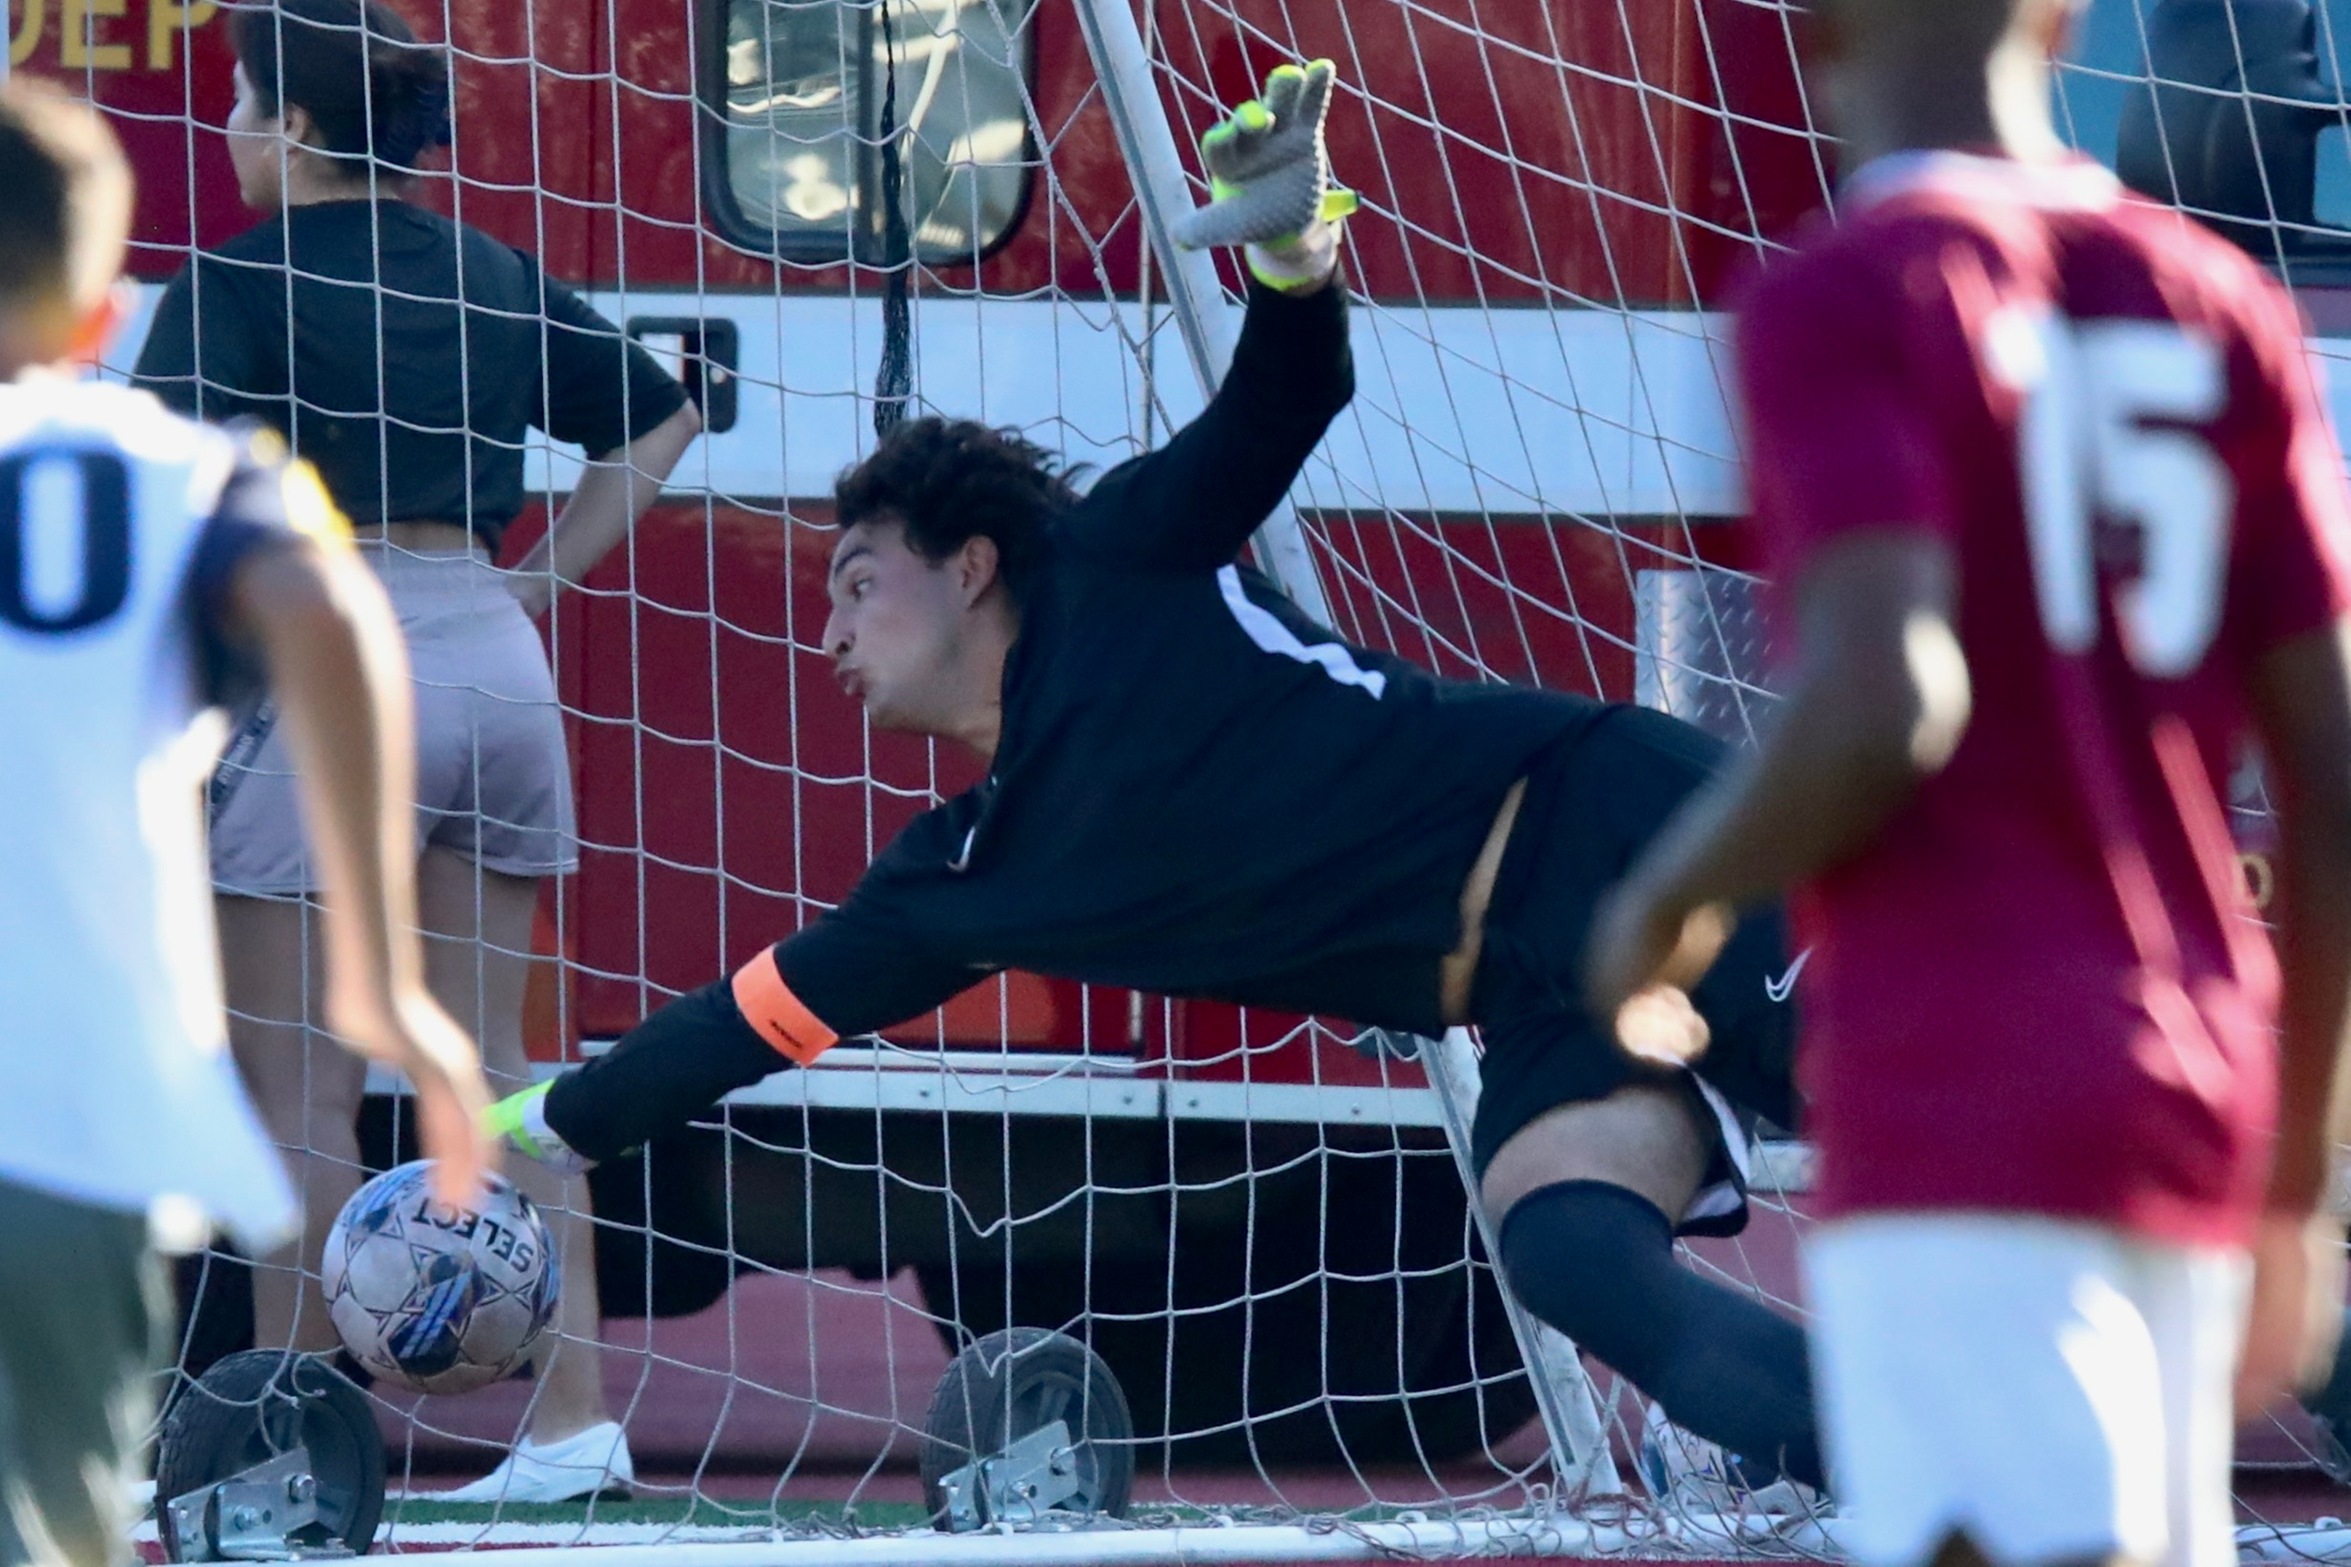 Kristopher Gutierrez makes this save on a penalty kick during PCC's season opening win over Canyons Friday at Robinson Stadium (photo by Michael Watkins).